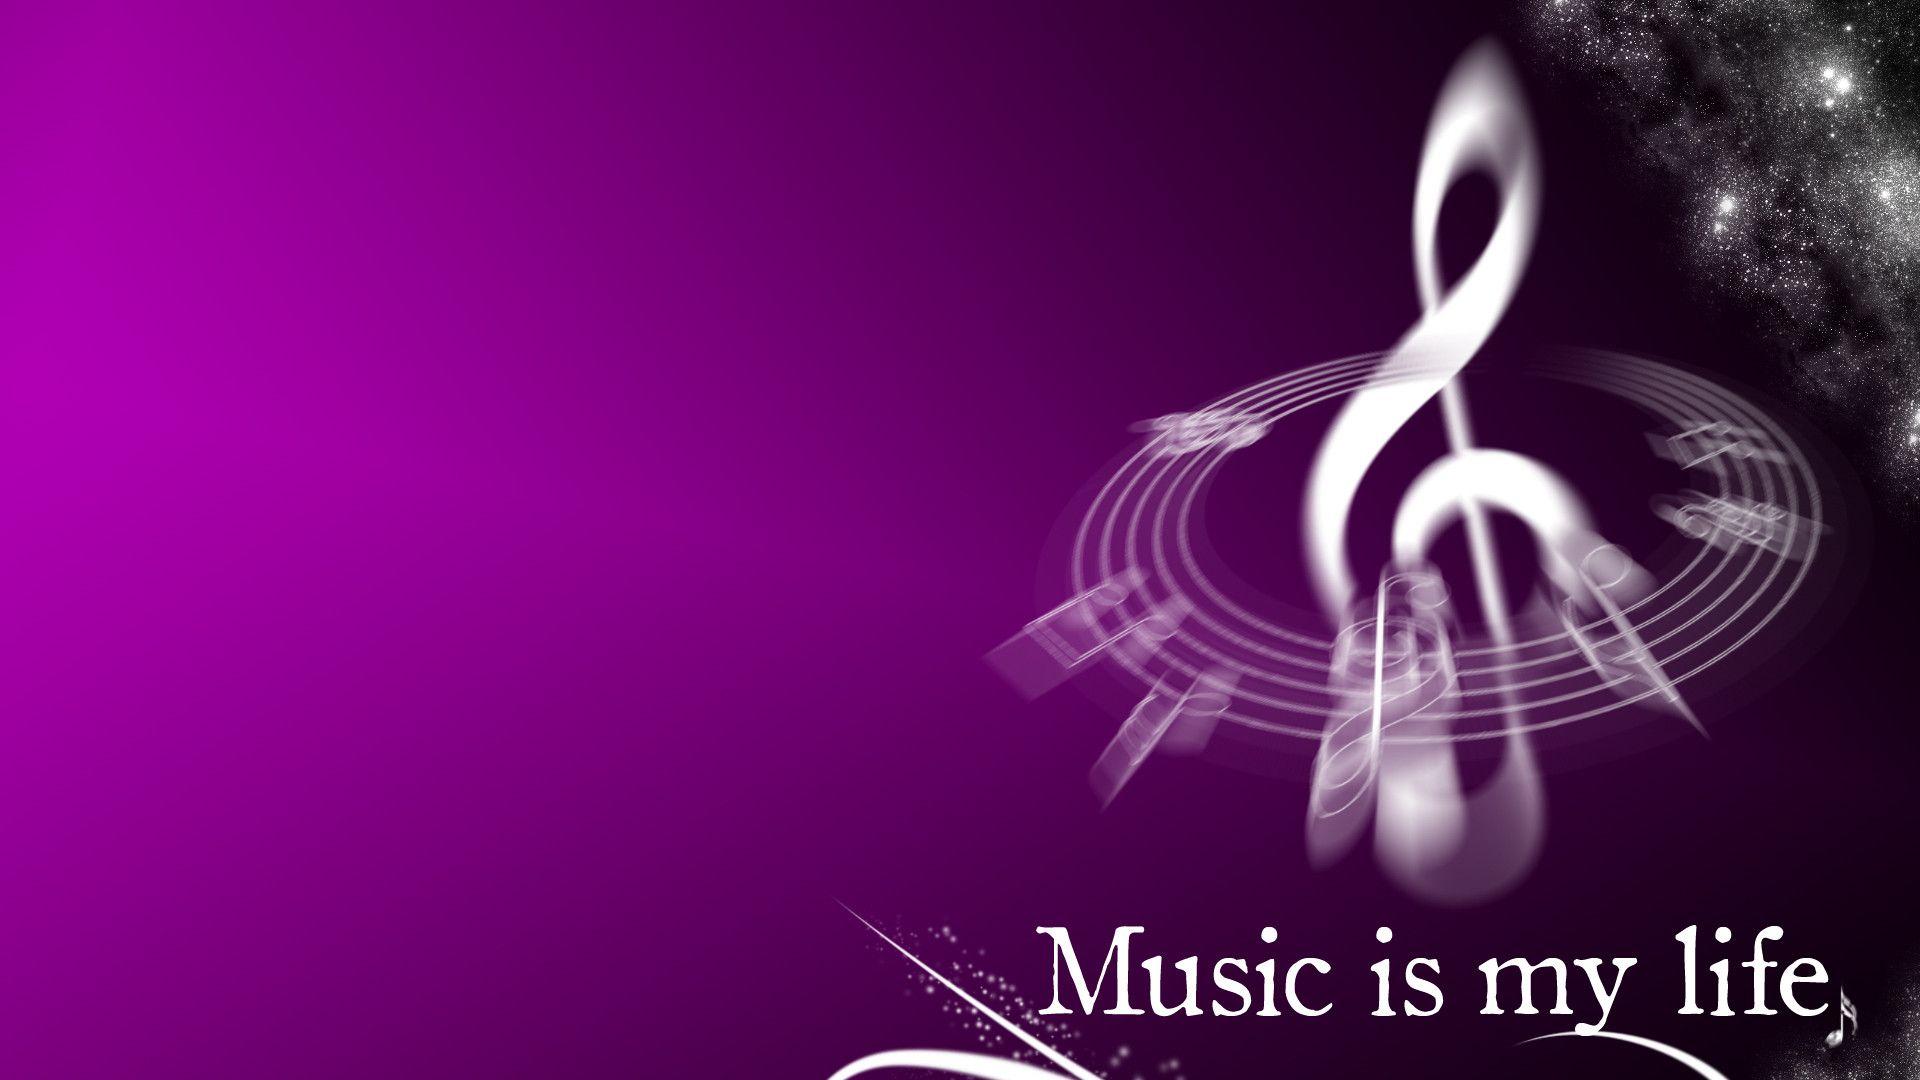 Music Is My Life Wallpaper, Music Is My Life Wallpaper for Desktop